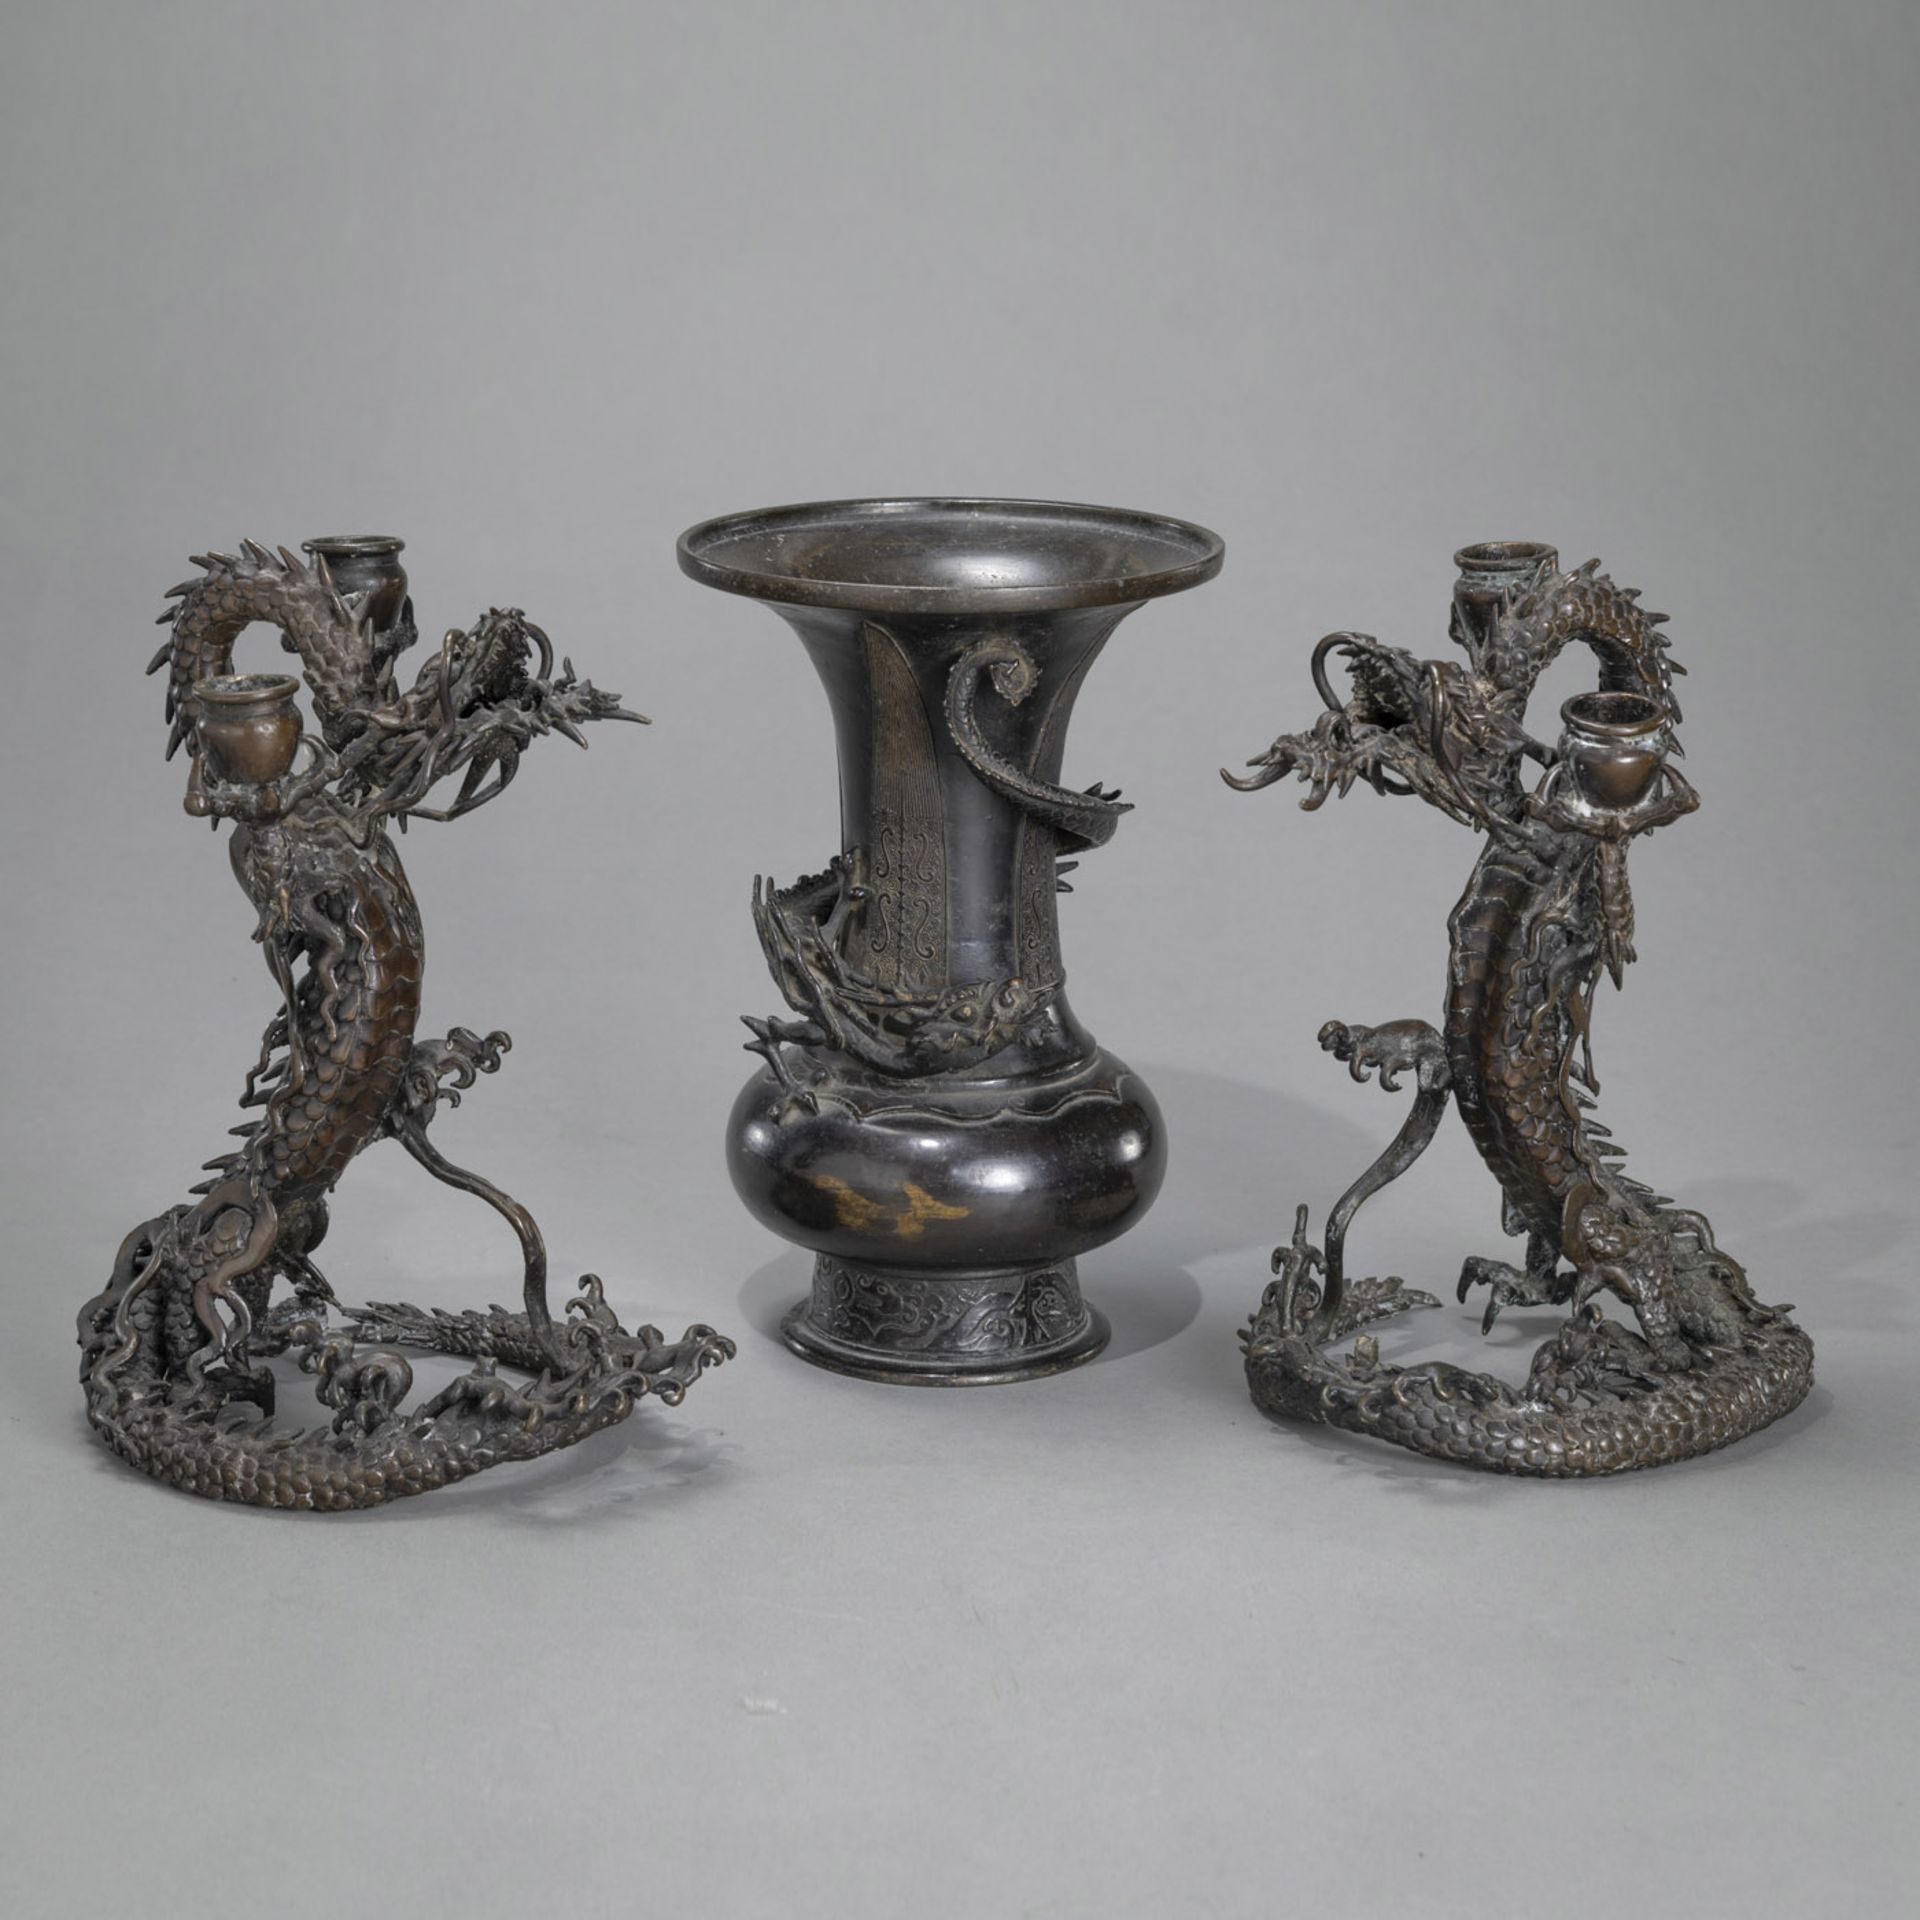 A PAIR OF DRAGON-SHAPED BRONZE CANDLESTICKS AND A BRONZE VASE WITH CURLING DRAGON